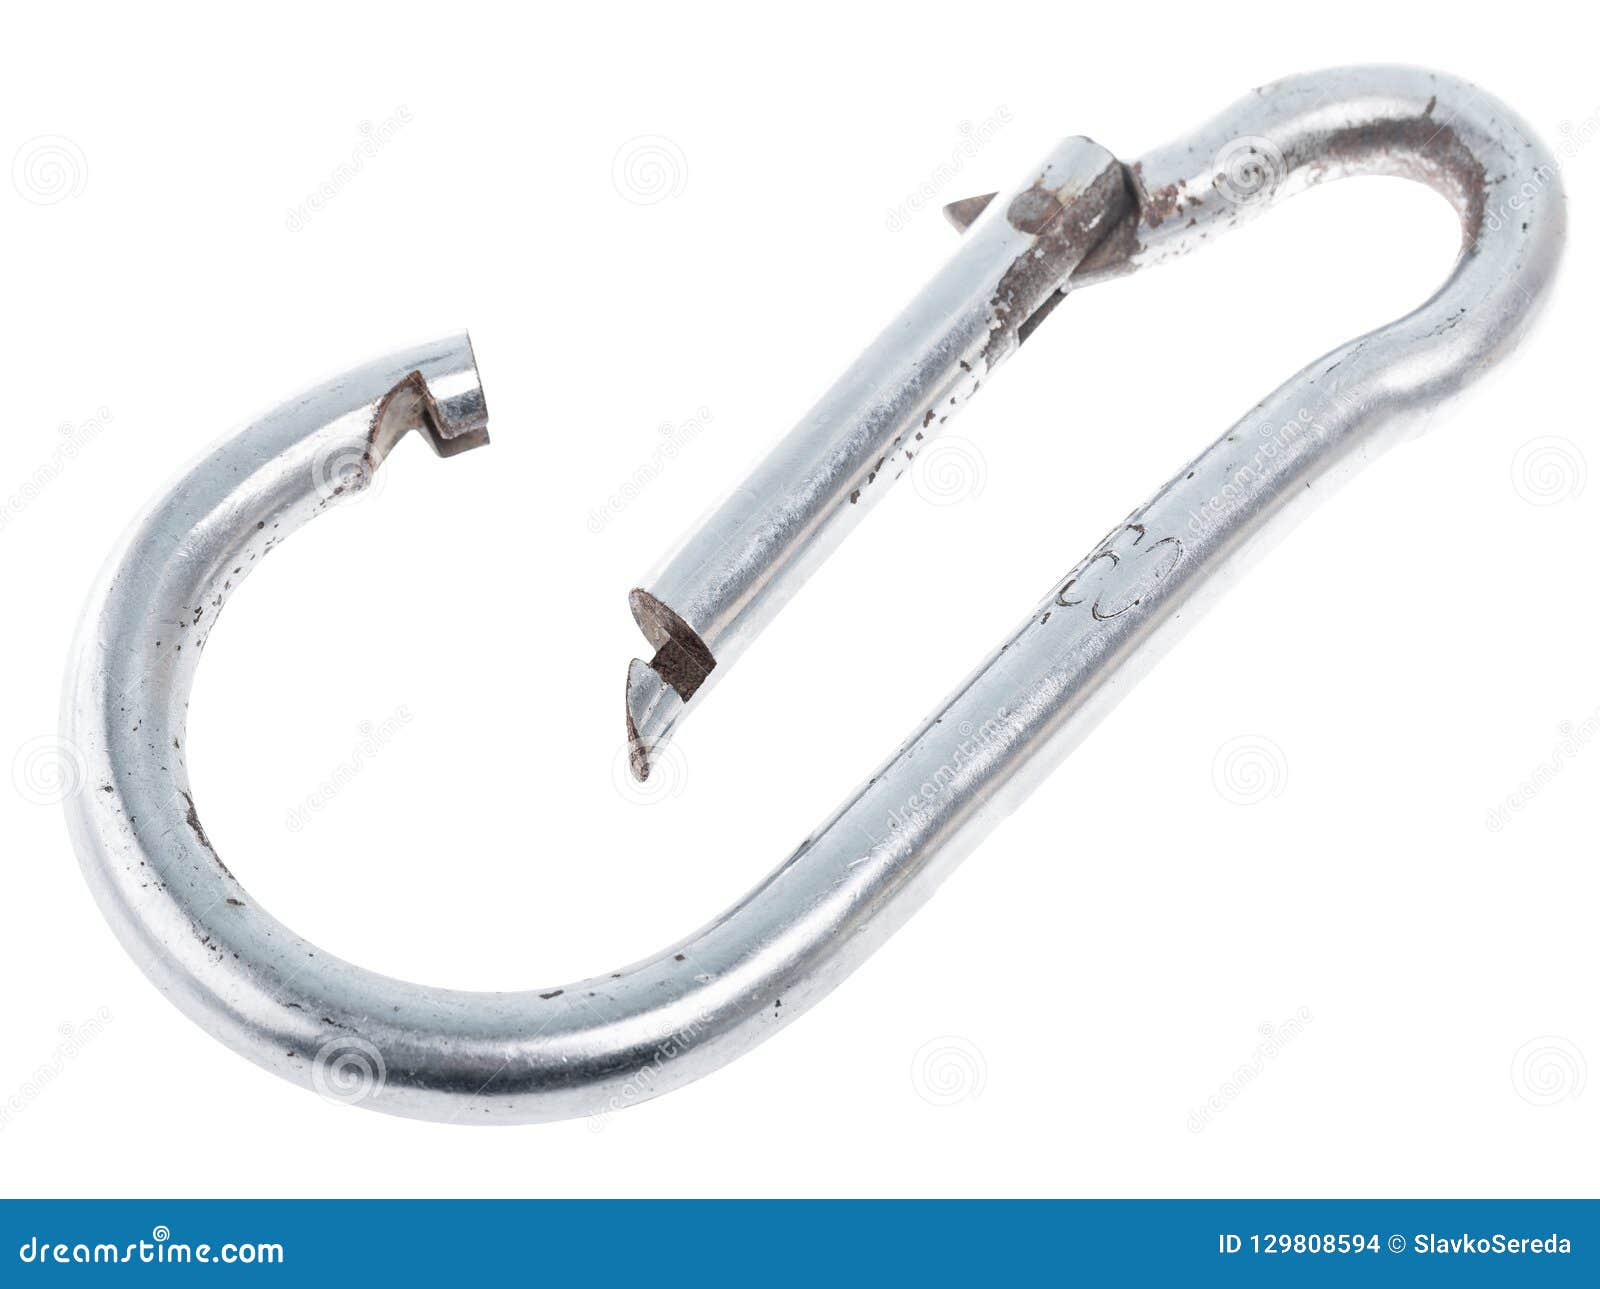 https://thumbs.dreamstime.com/z/stainless-steel-spring-snap-hook-carabiner-link-grade-heavy-duty-quick-lock-isolated-white-background-129808594.jpg